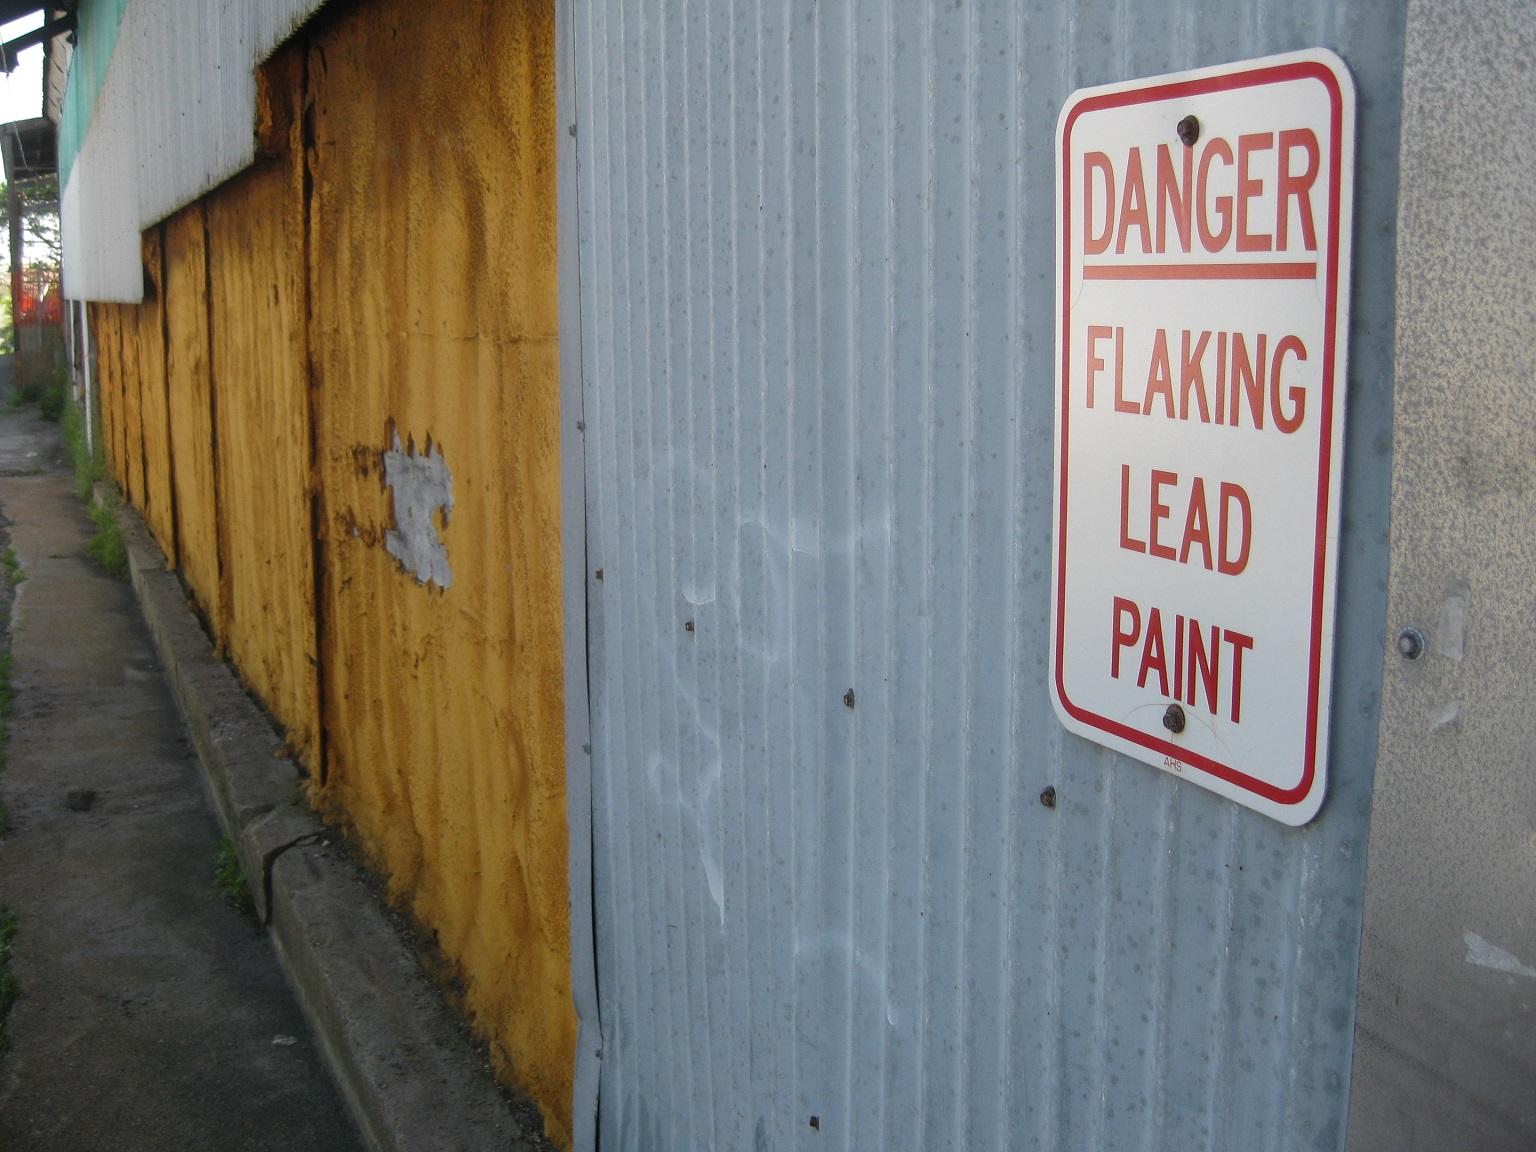 A warning sign on a tool factory in Rockport, Massachusetts. (Ben+Sam / Flickr)